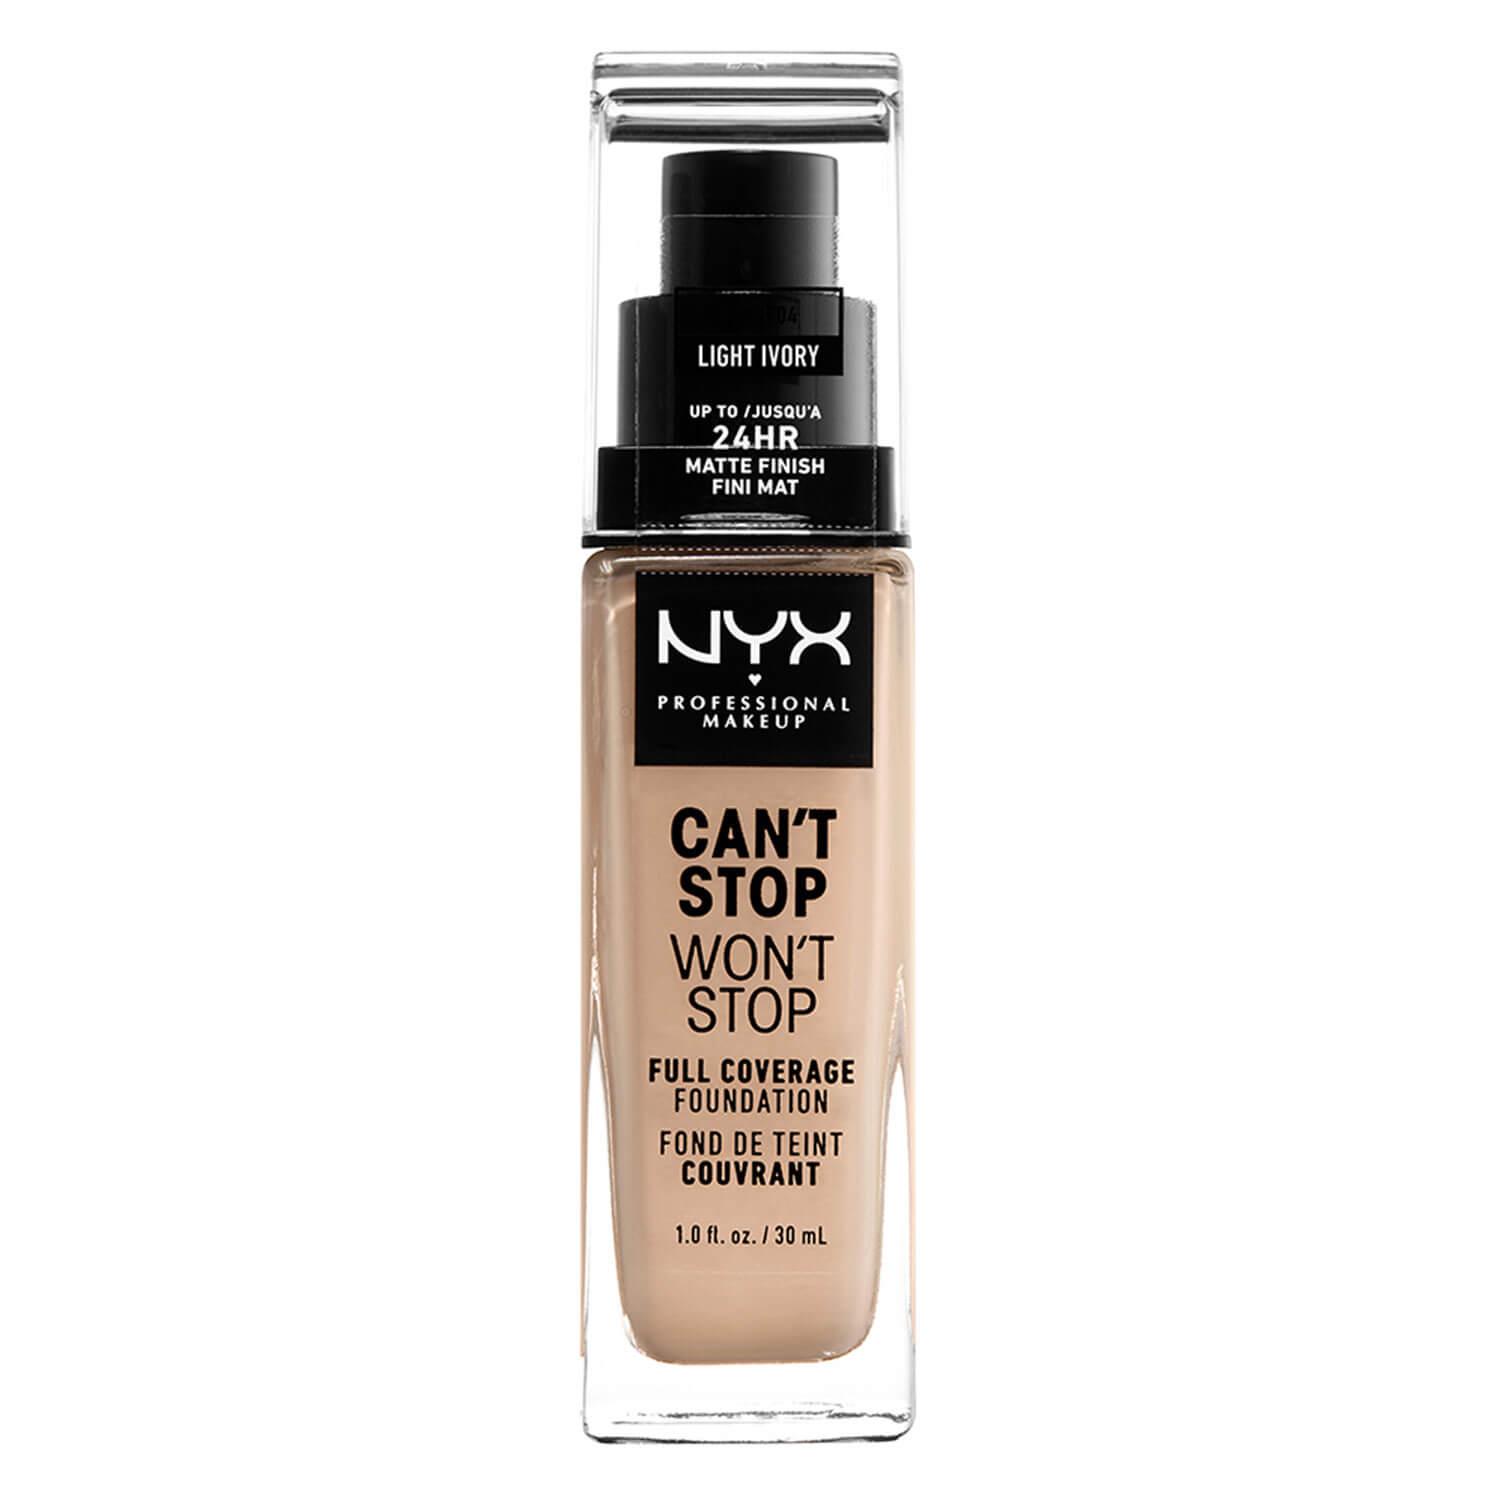 Can't Stop Won't Stop - Full Coverage Foundation Light Ivory